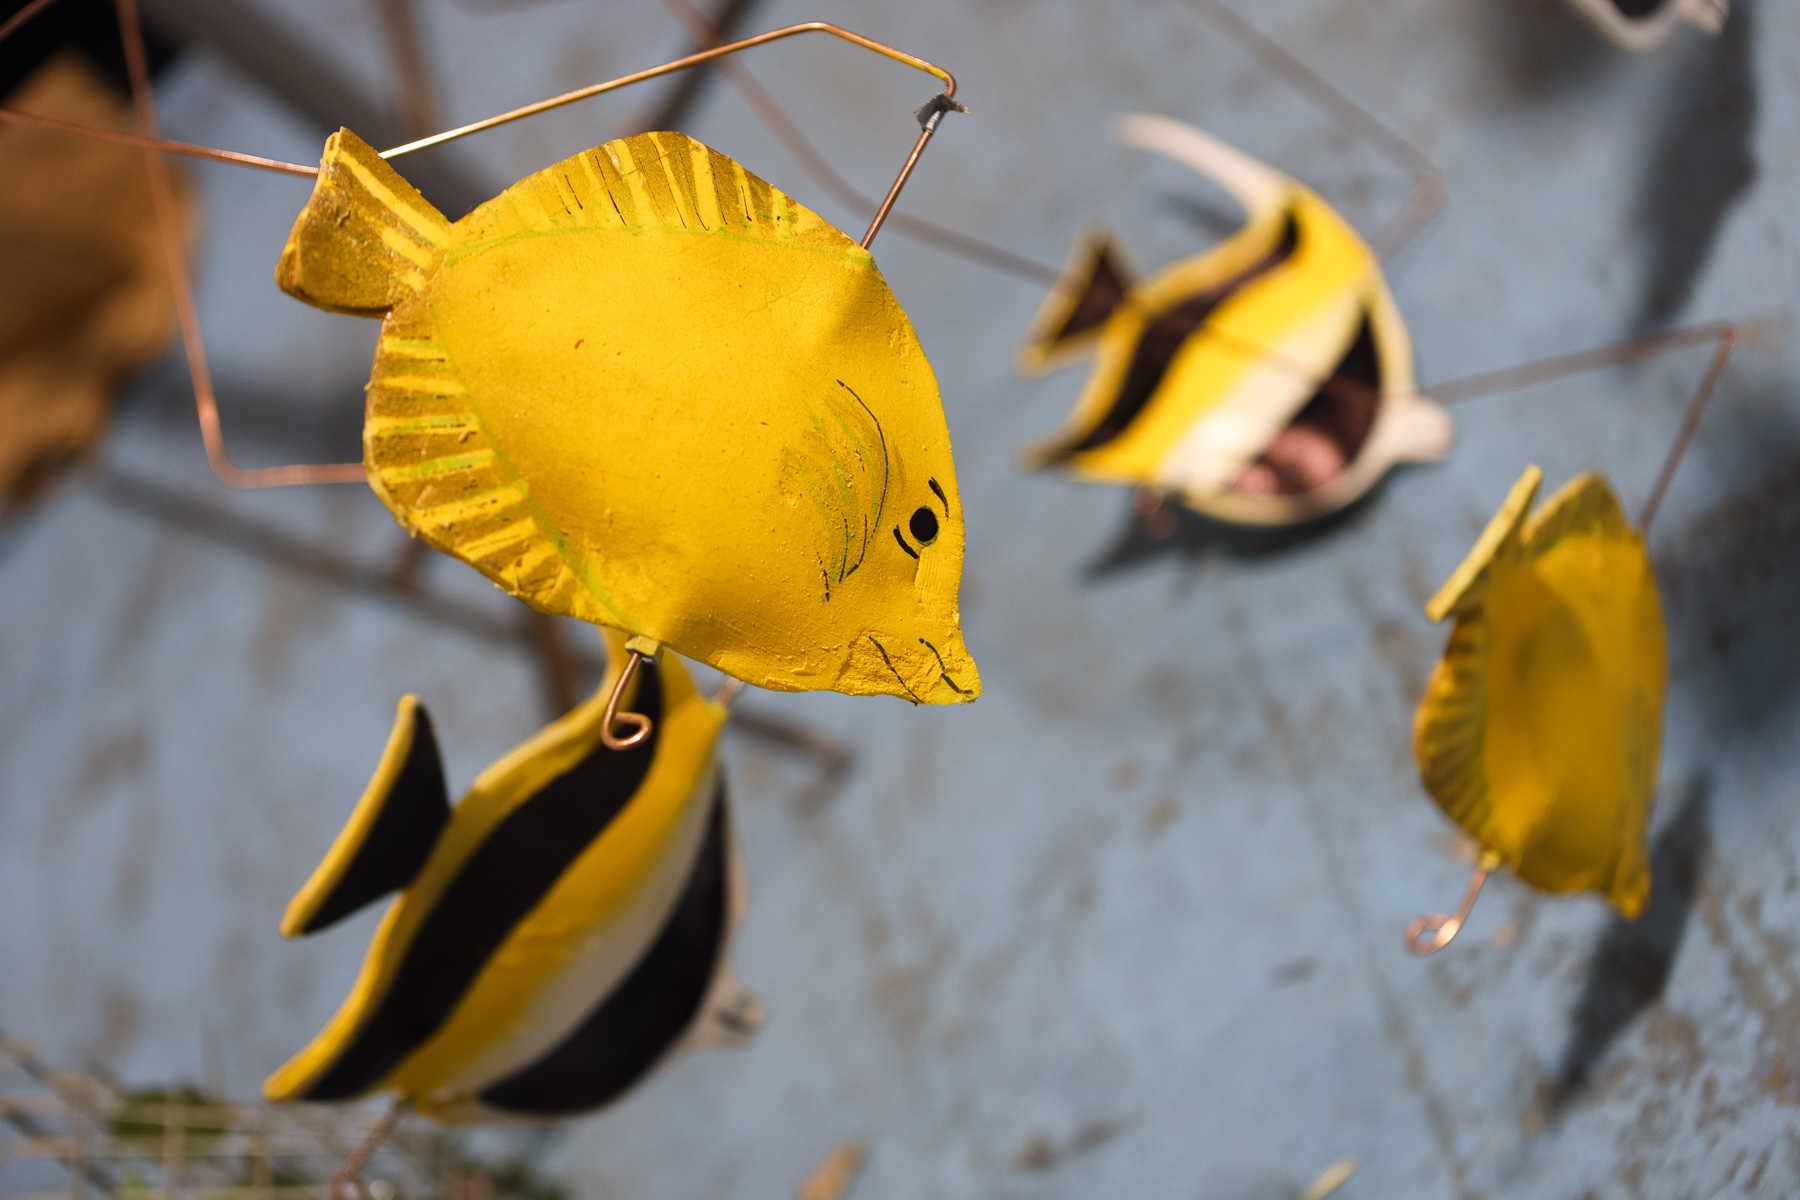 Yellow fish puppets from the production.